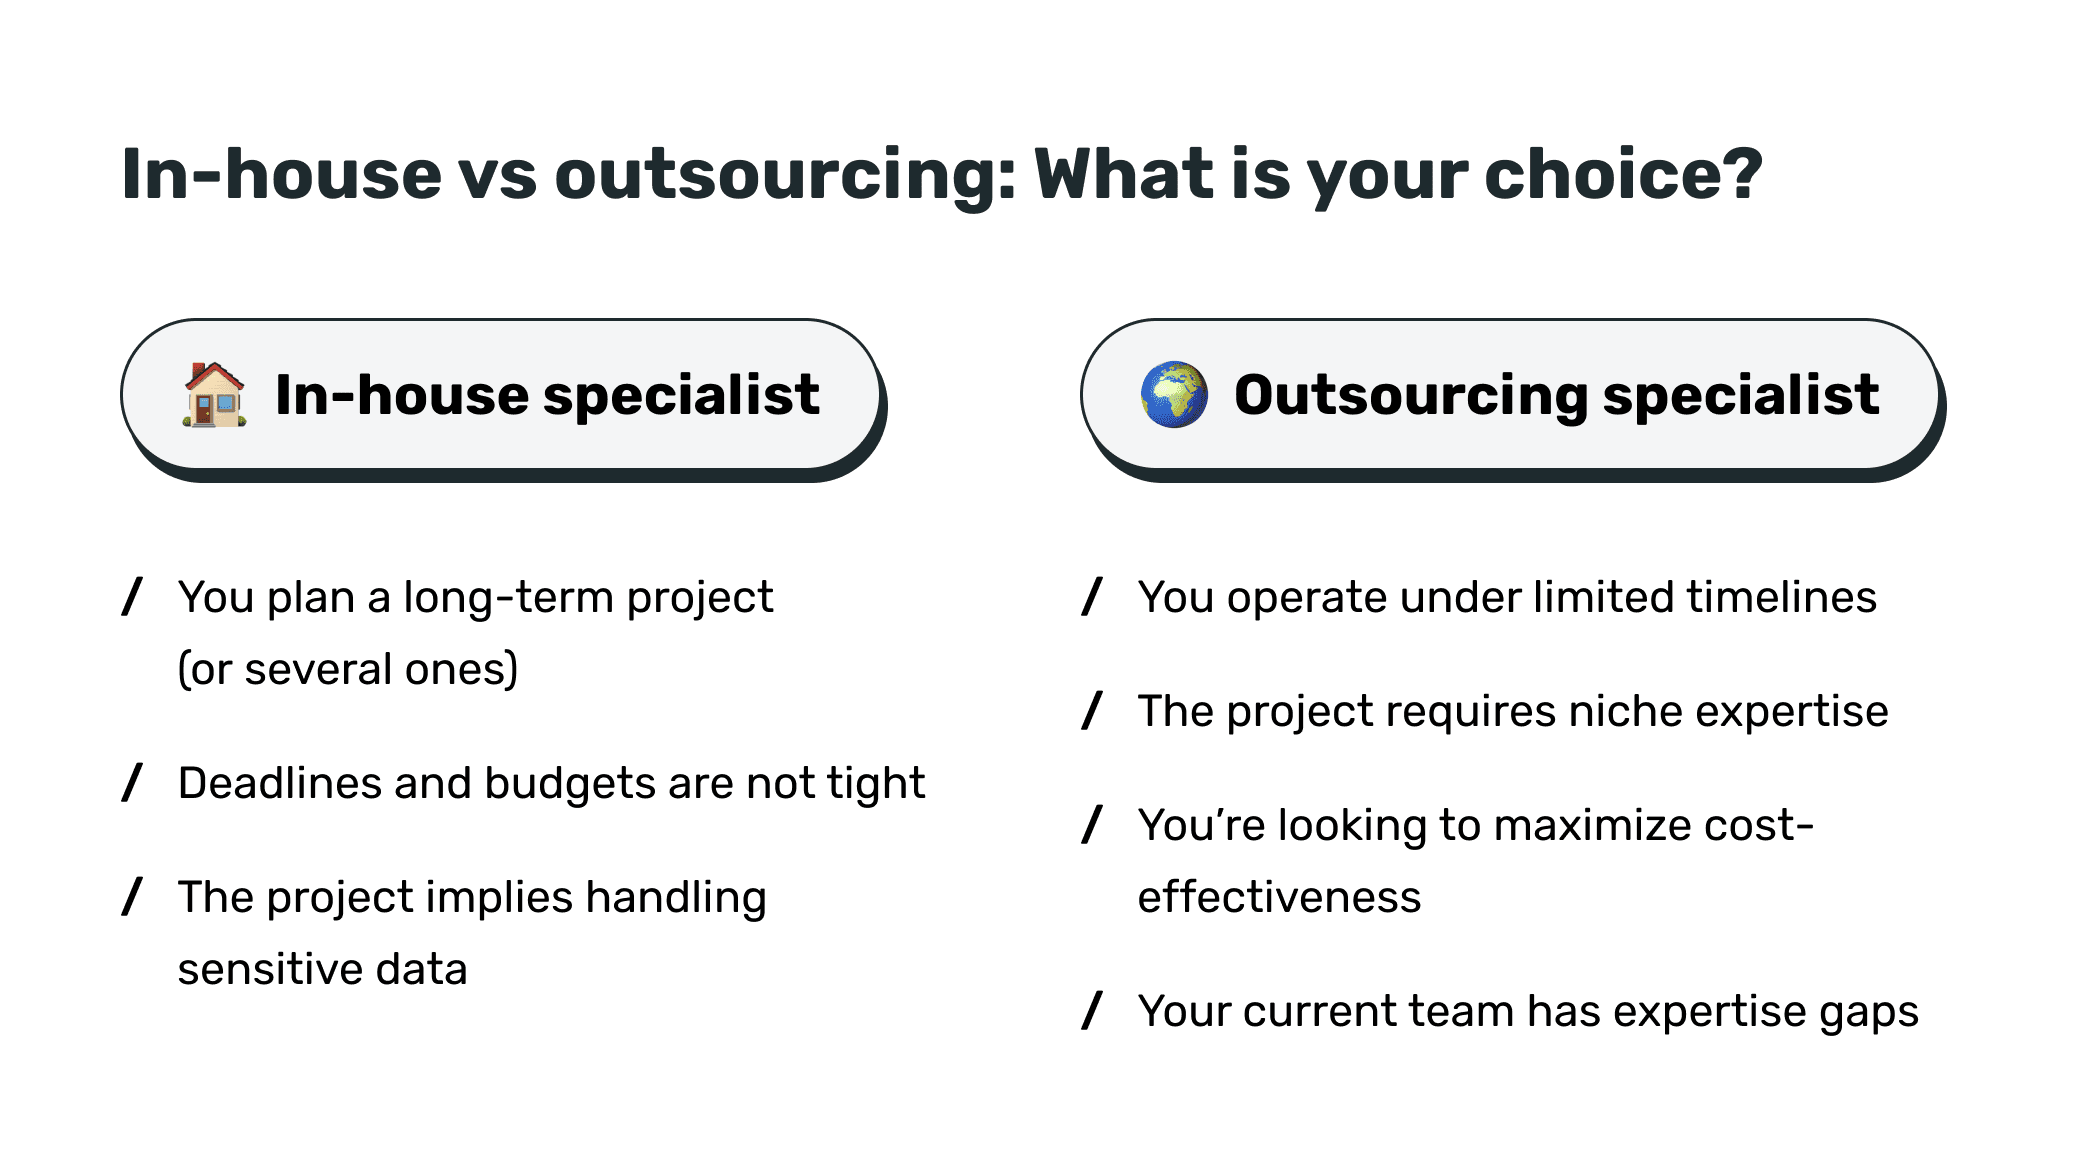 In-house vs outsourcing: What is your choice?